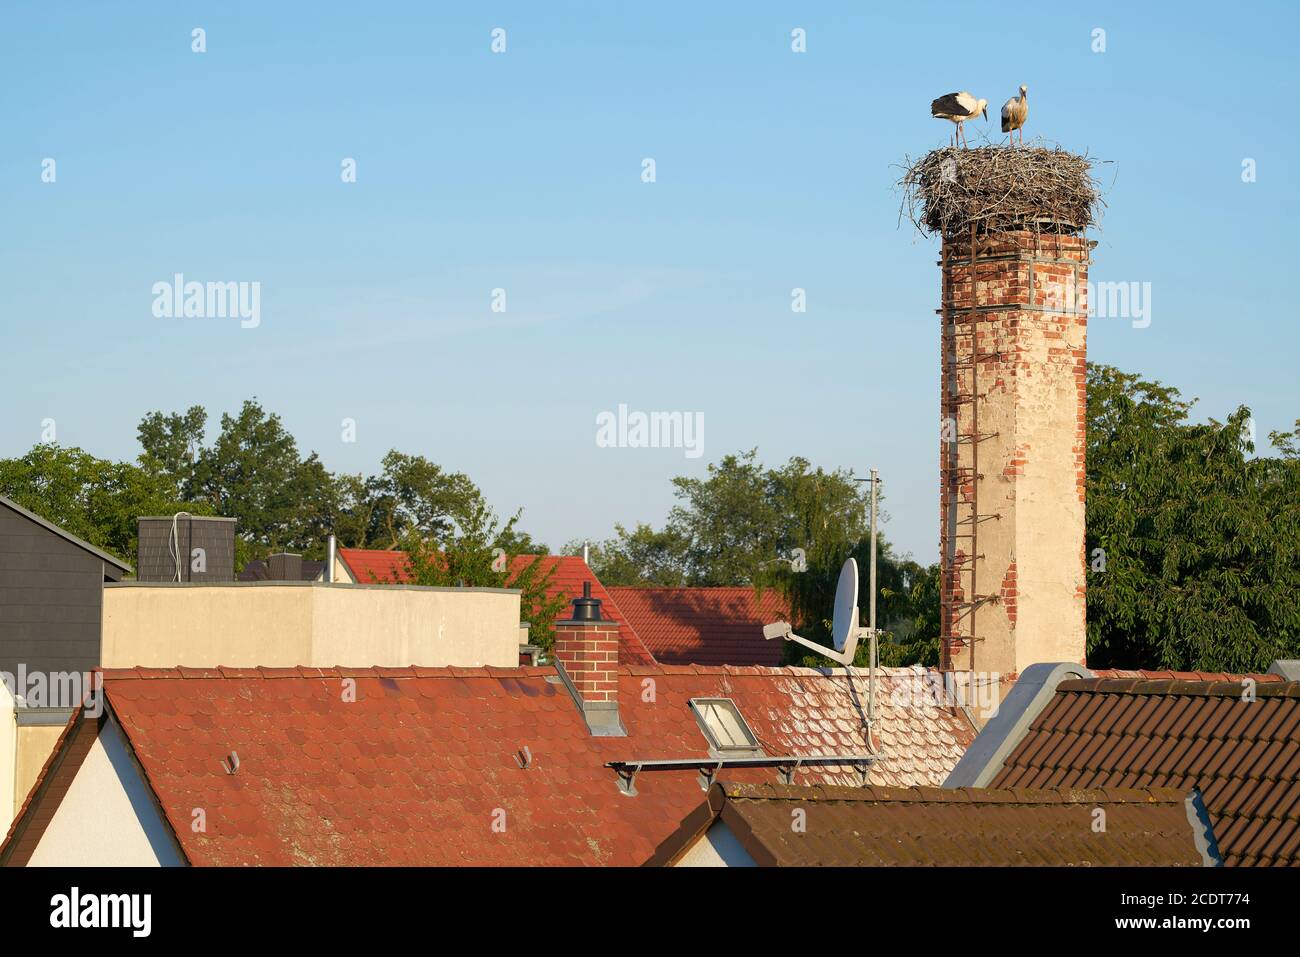 Stork nest above the roofs of the village Biederitz near Magdeburg Stock Photo